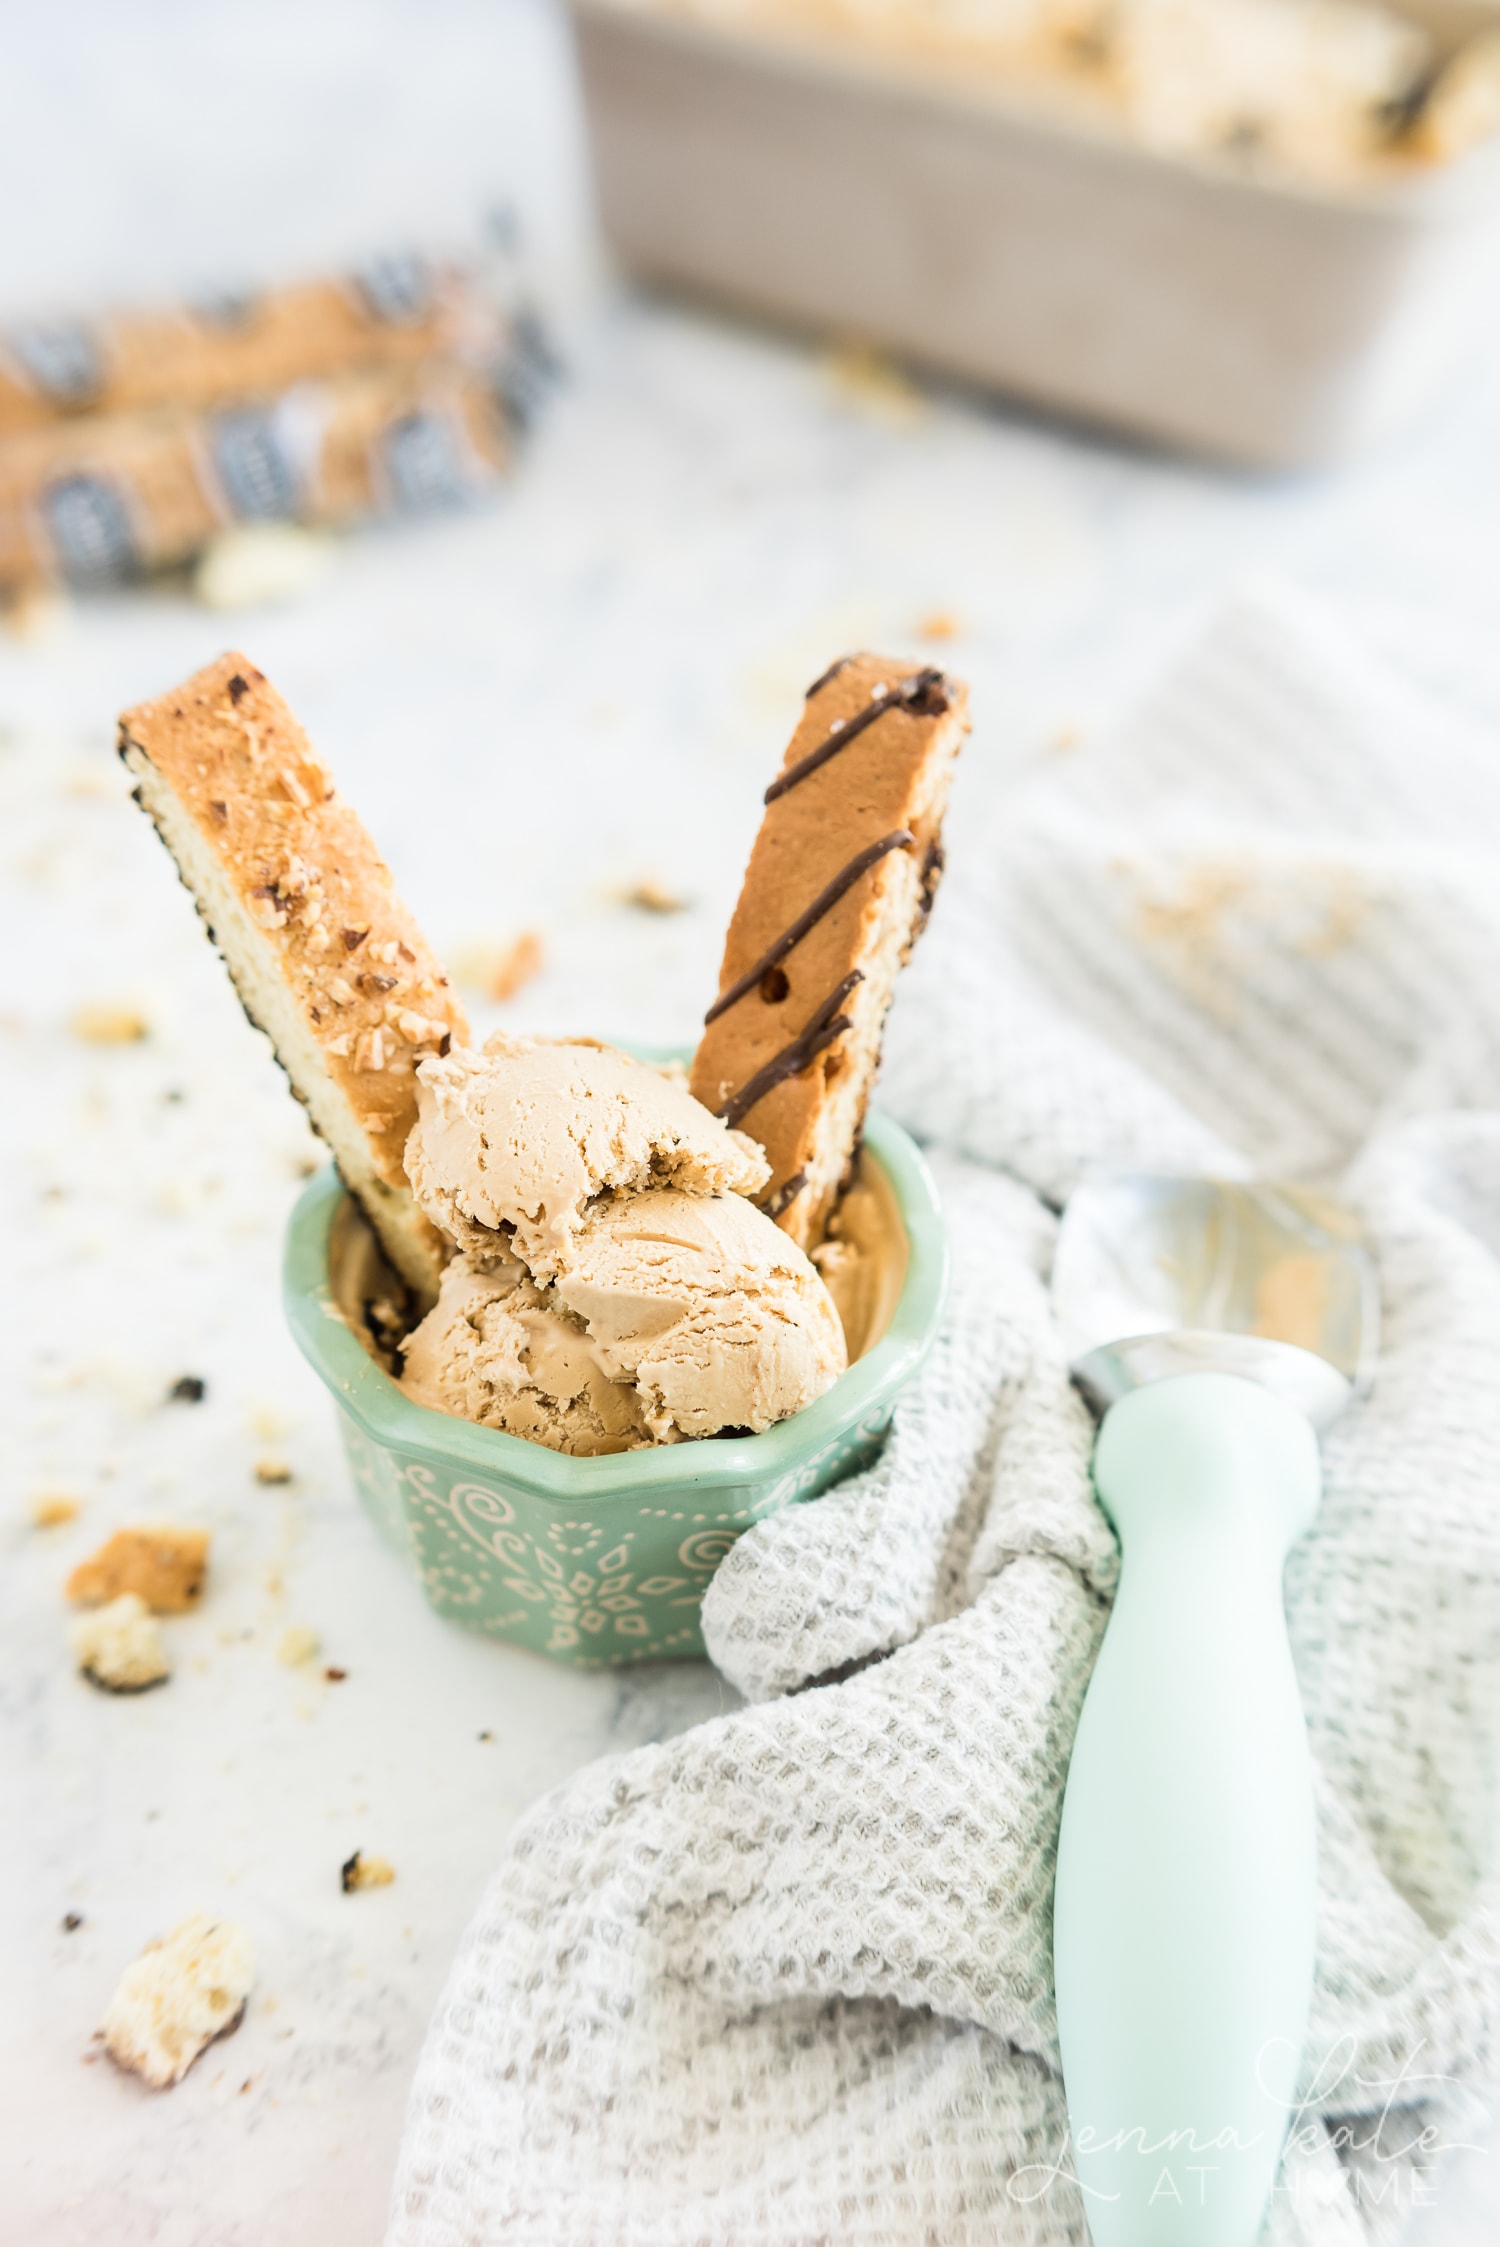 Scoops of ice cream in a small bowl with two biscotti in it